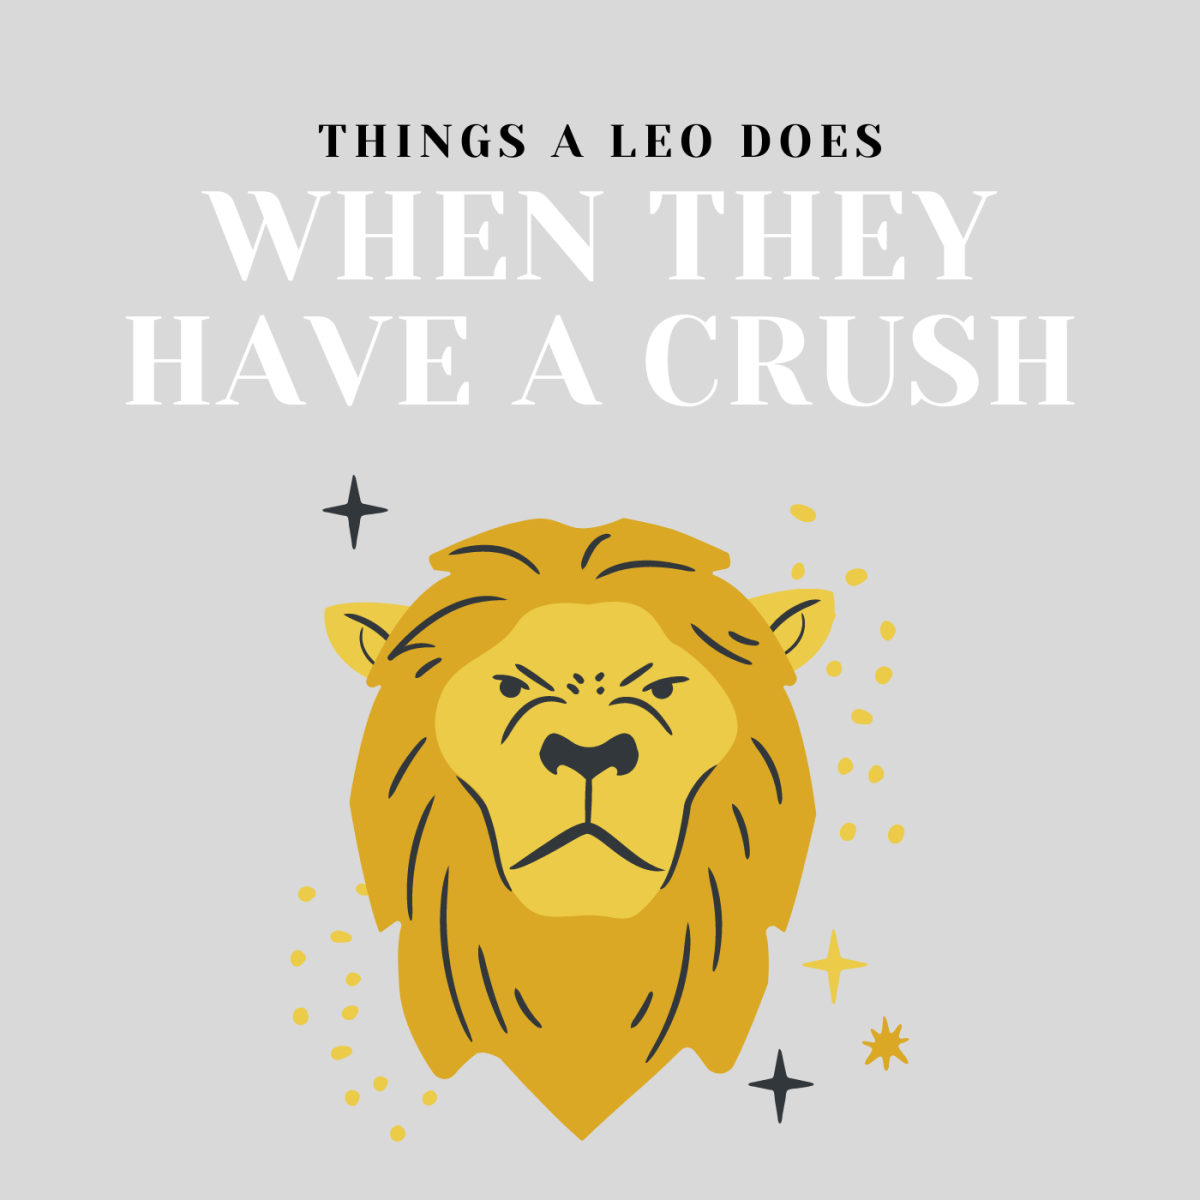 14 Things a Leo Does When They Have a Crush